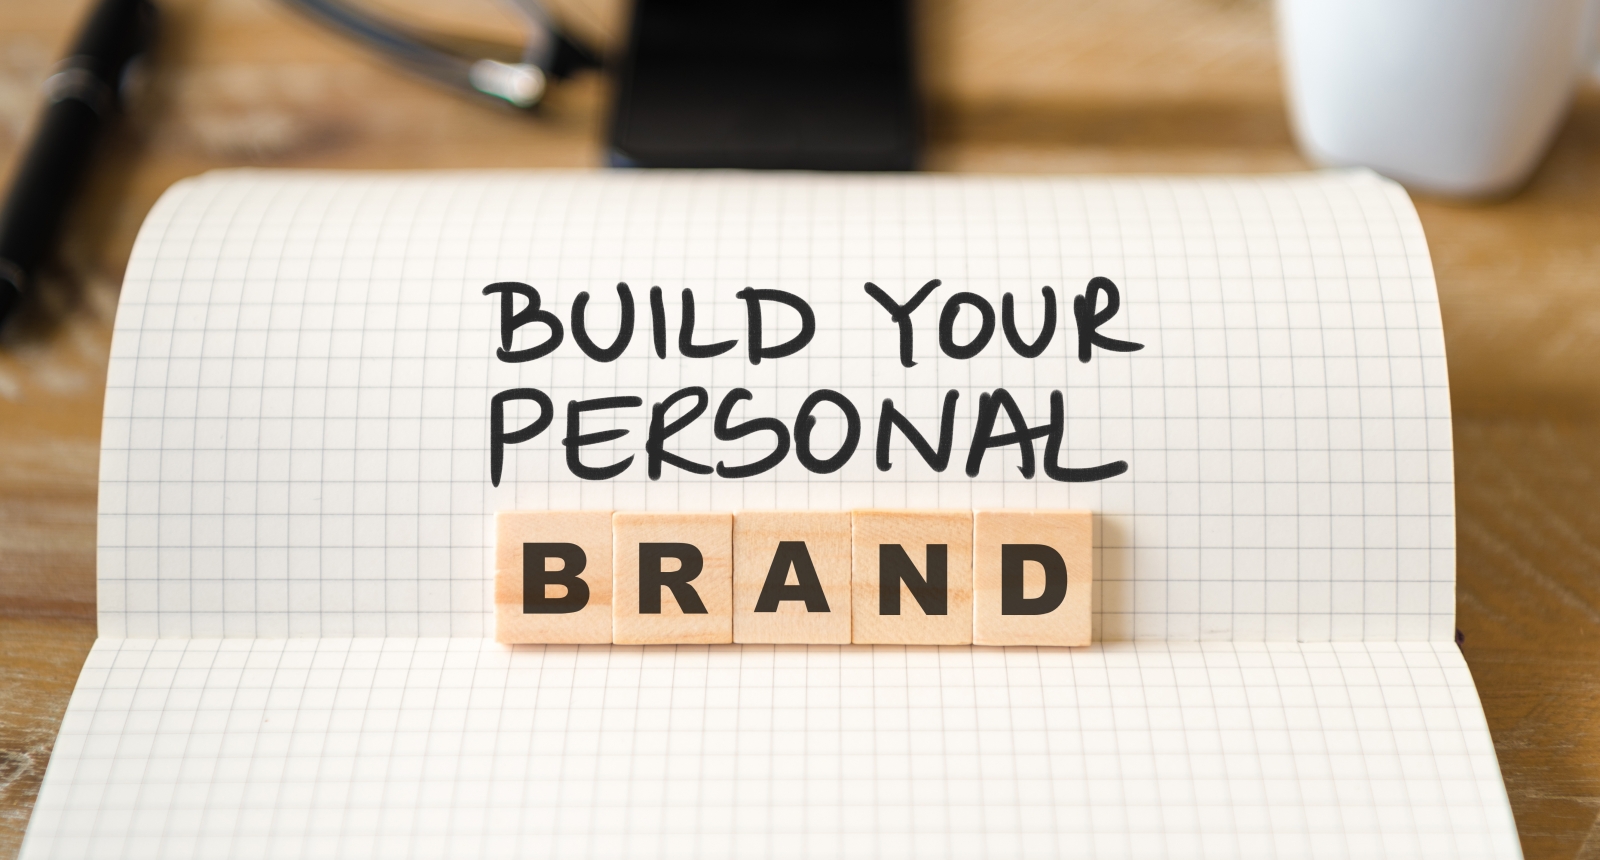 Ruled book and blocks saying building your personal brand